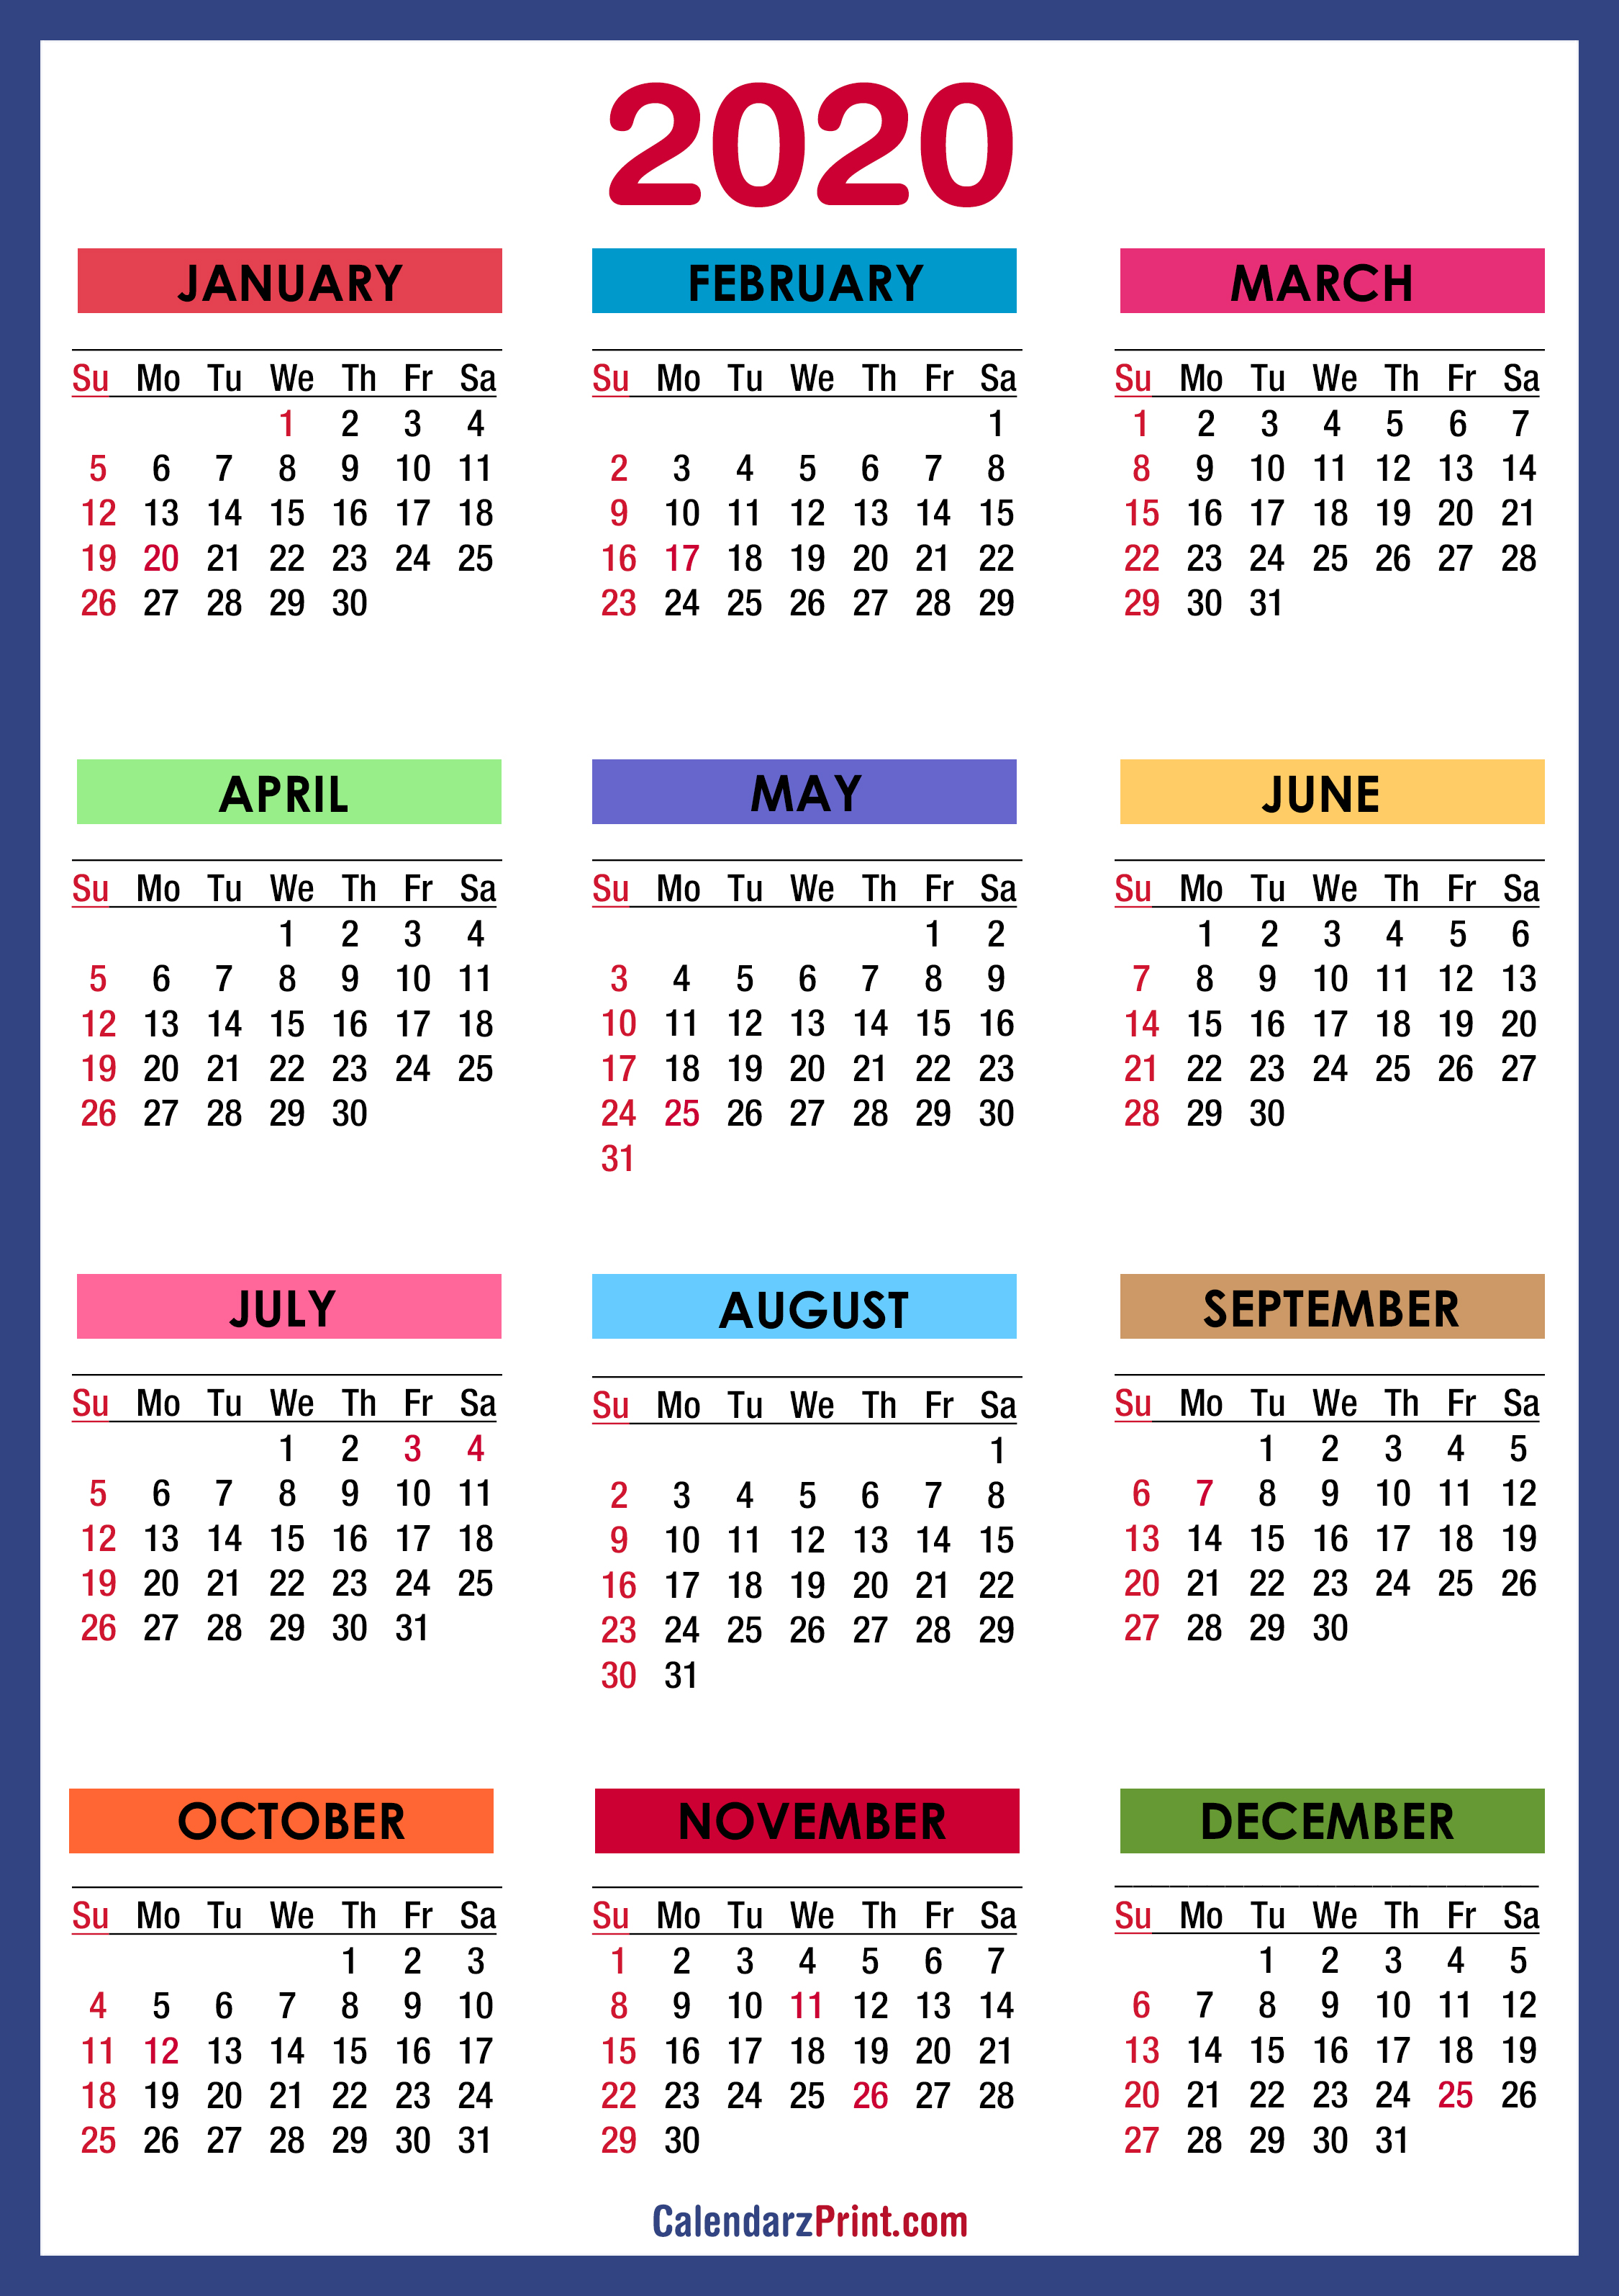 2020 Calendar With Holidays Printable Free Colorful Blue Green 